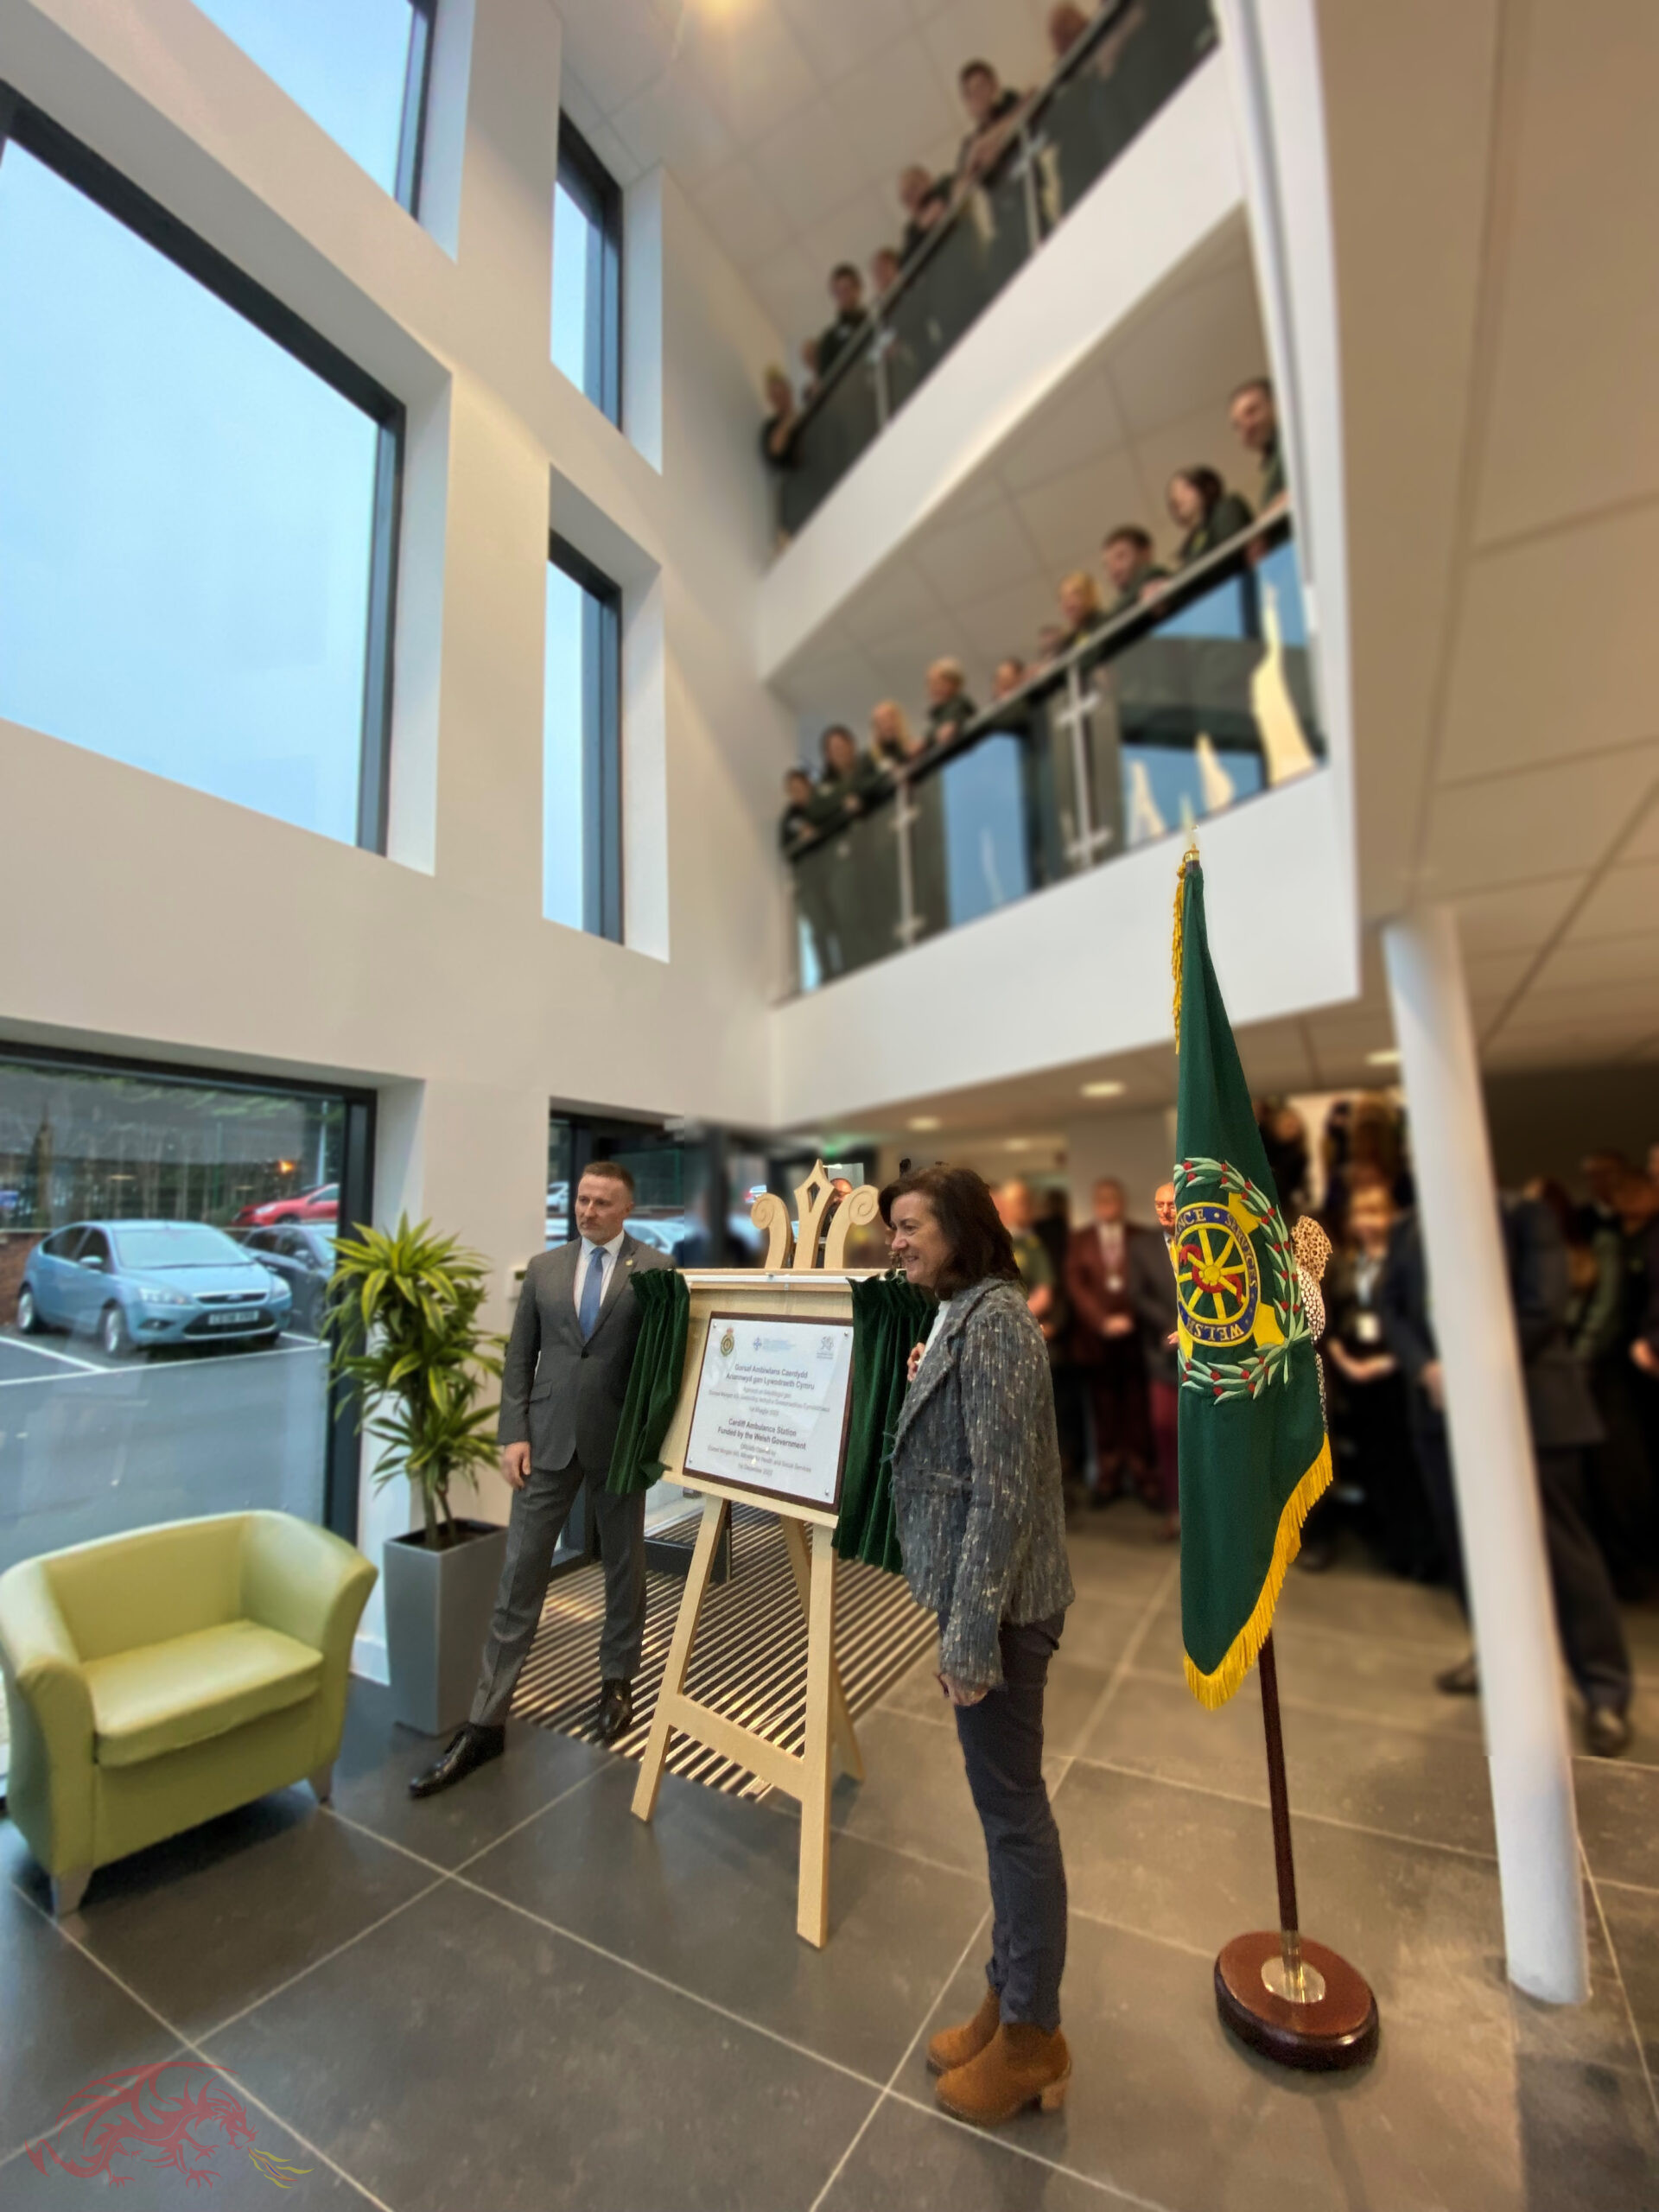 Minister opens Cardiff’s new state-of-the art ambulance station